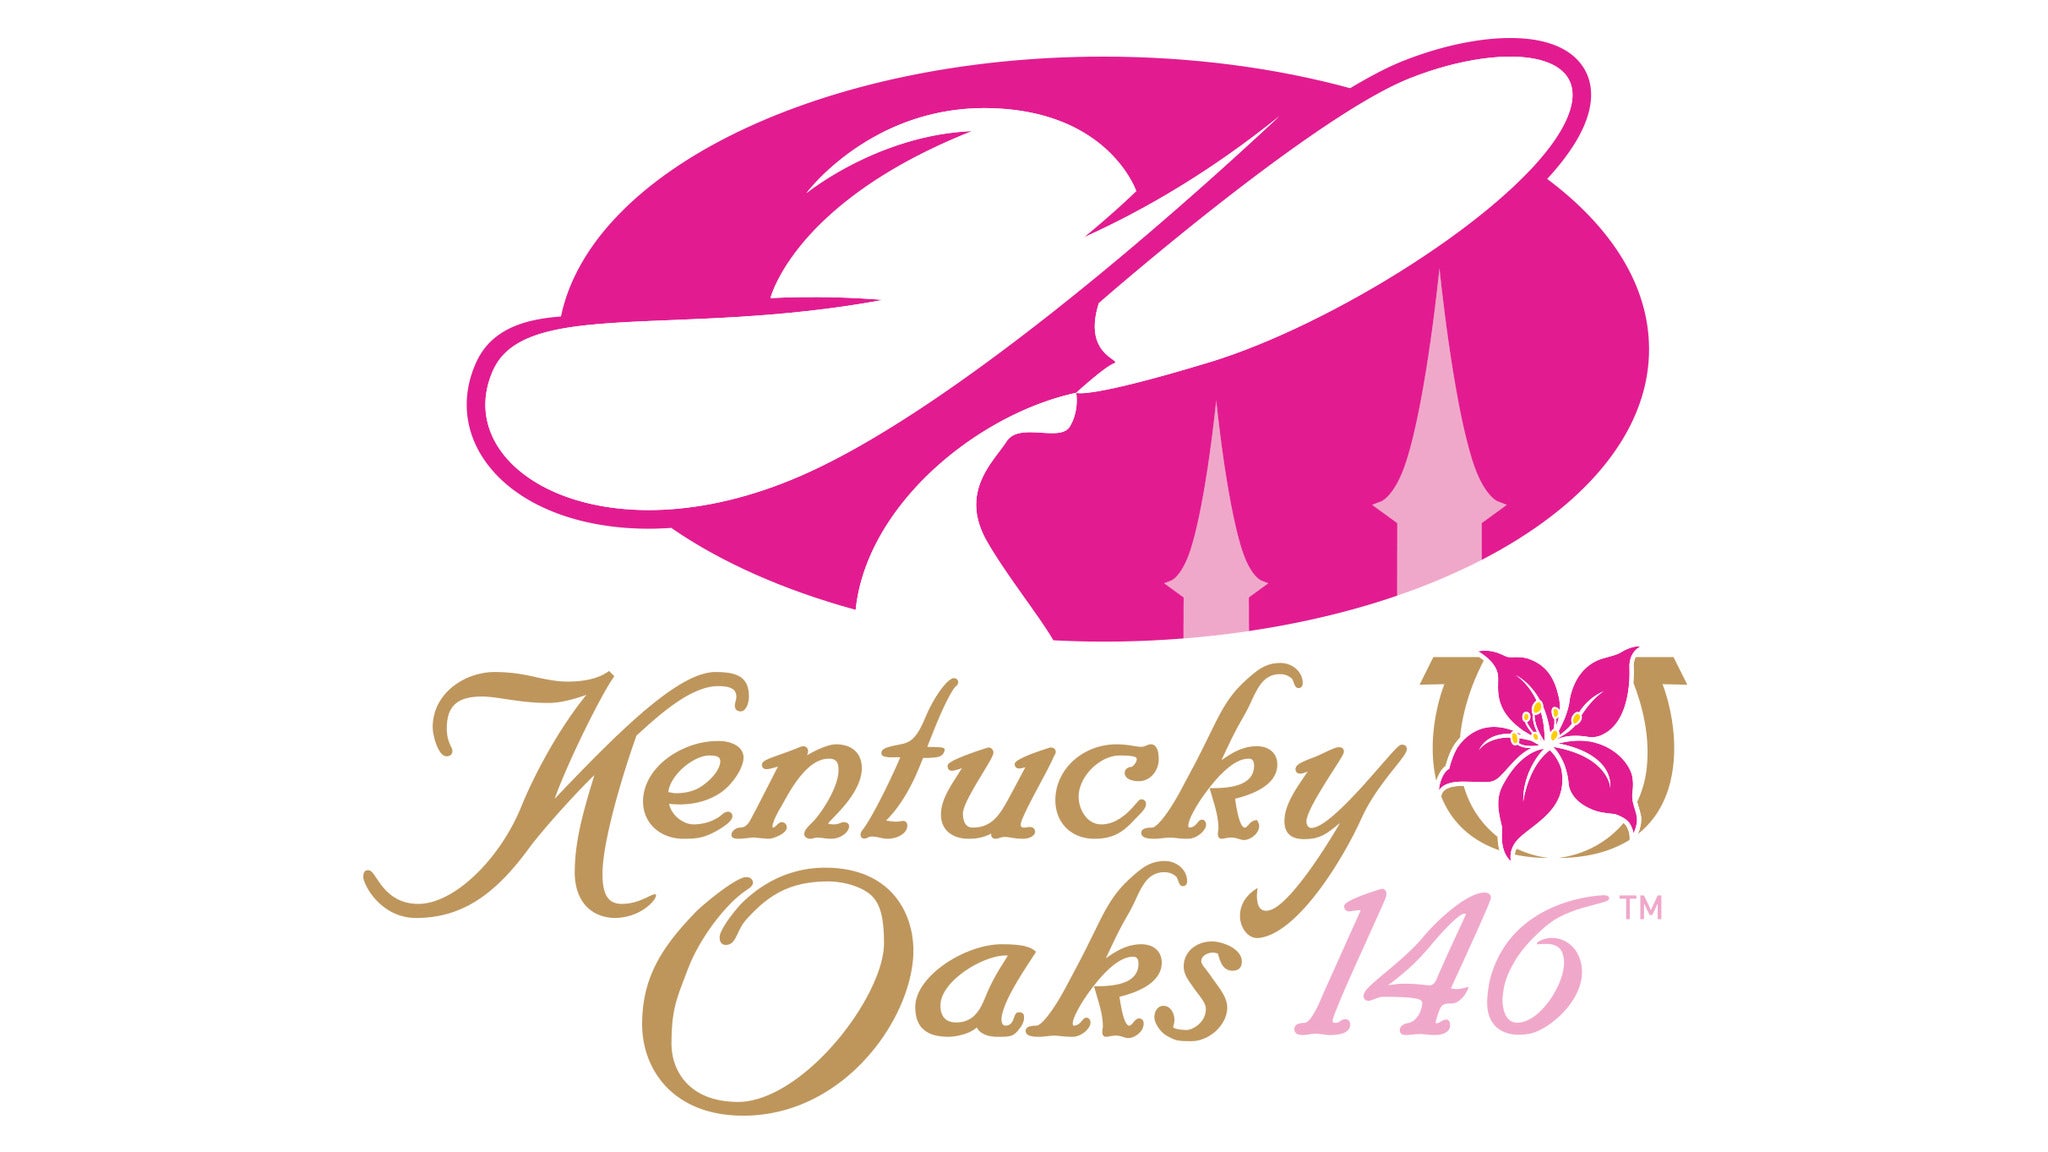 146th Kentucky Oaks - Infield & Paddock General Admission Single Day in Louisville promo photo for Day of Race Purchase Pricing presale offer code